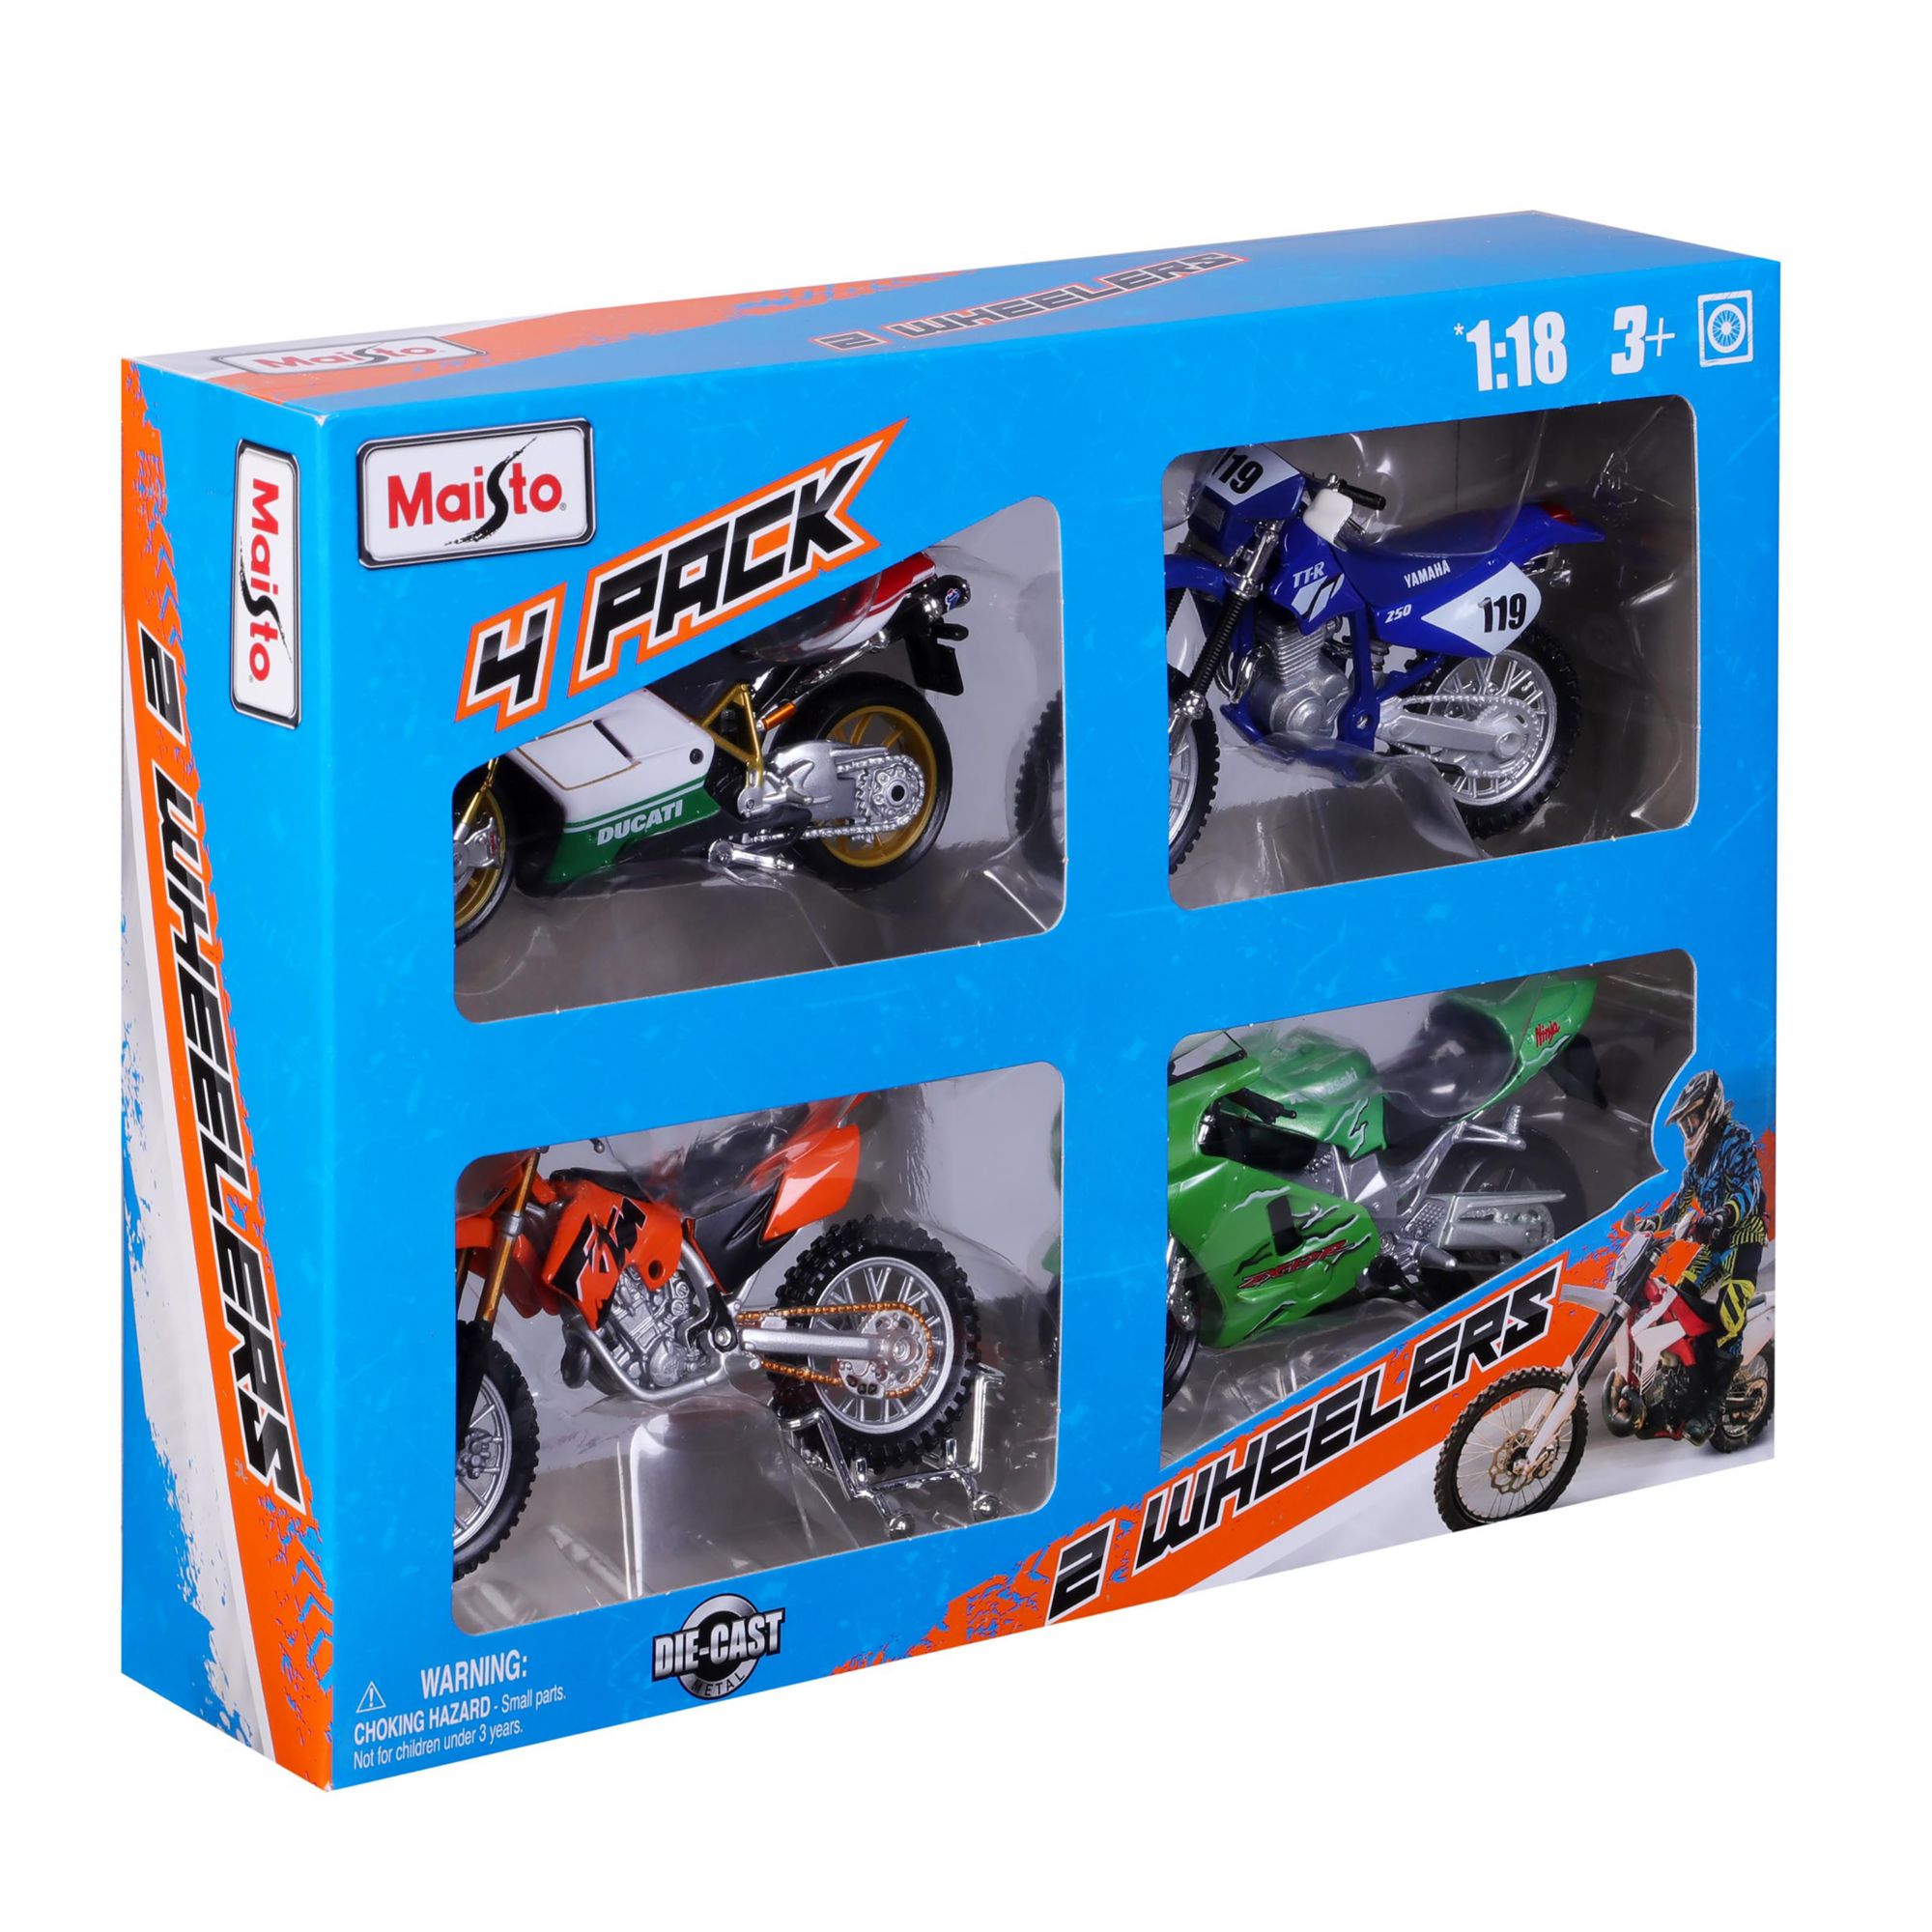  Maisto 1582467 Highly Detailed Motorcycles, Multicolor, 4 Pack  : Automotive